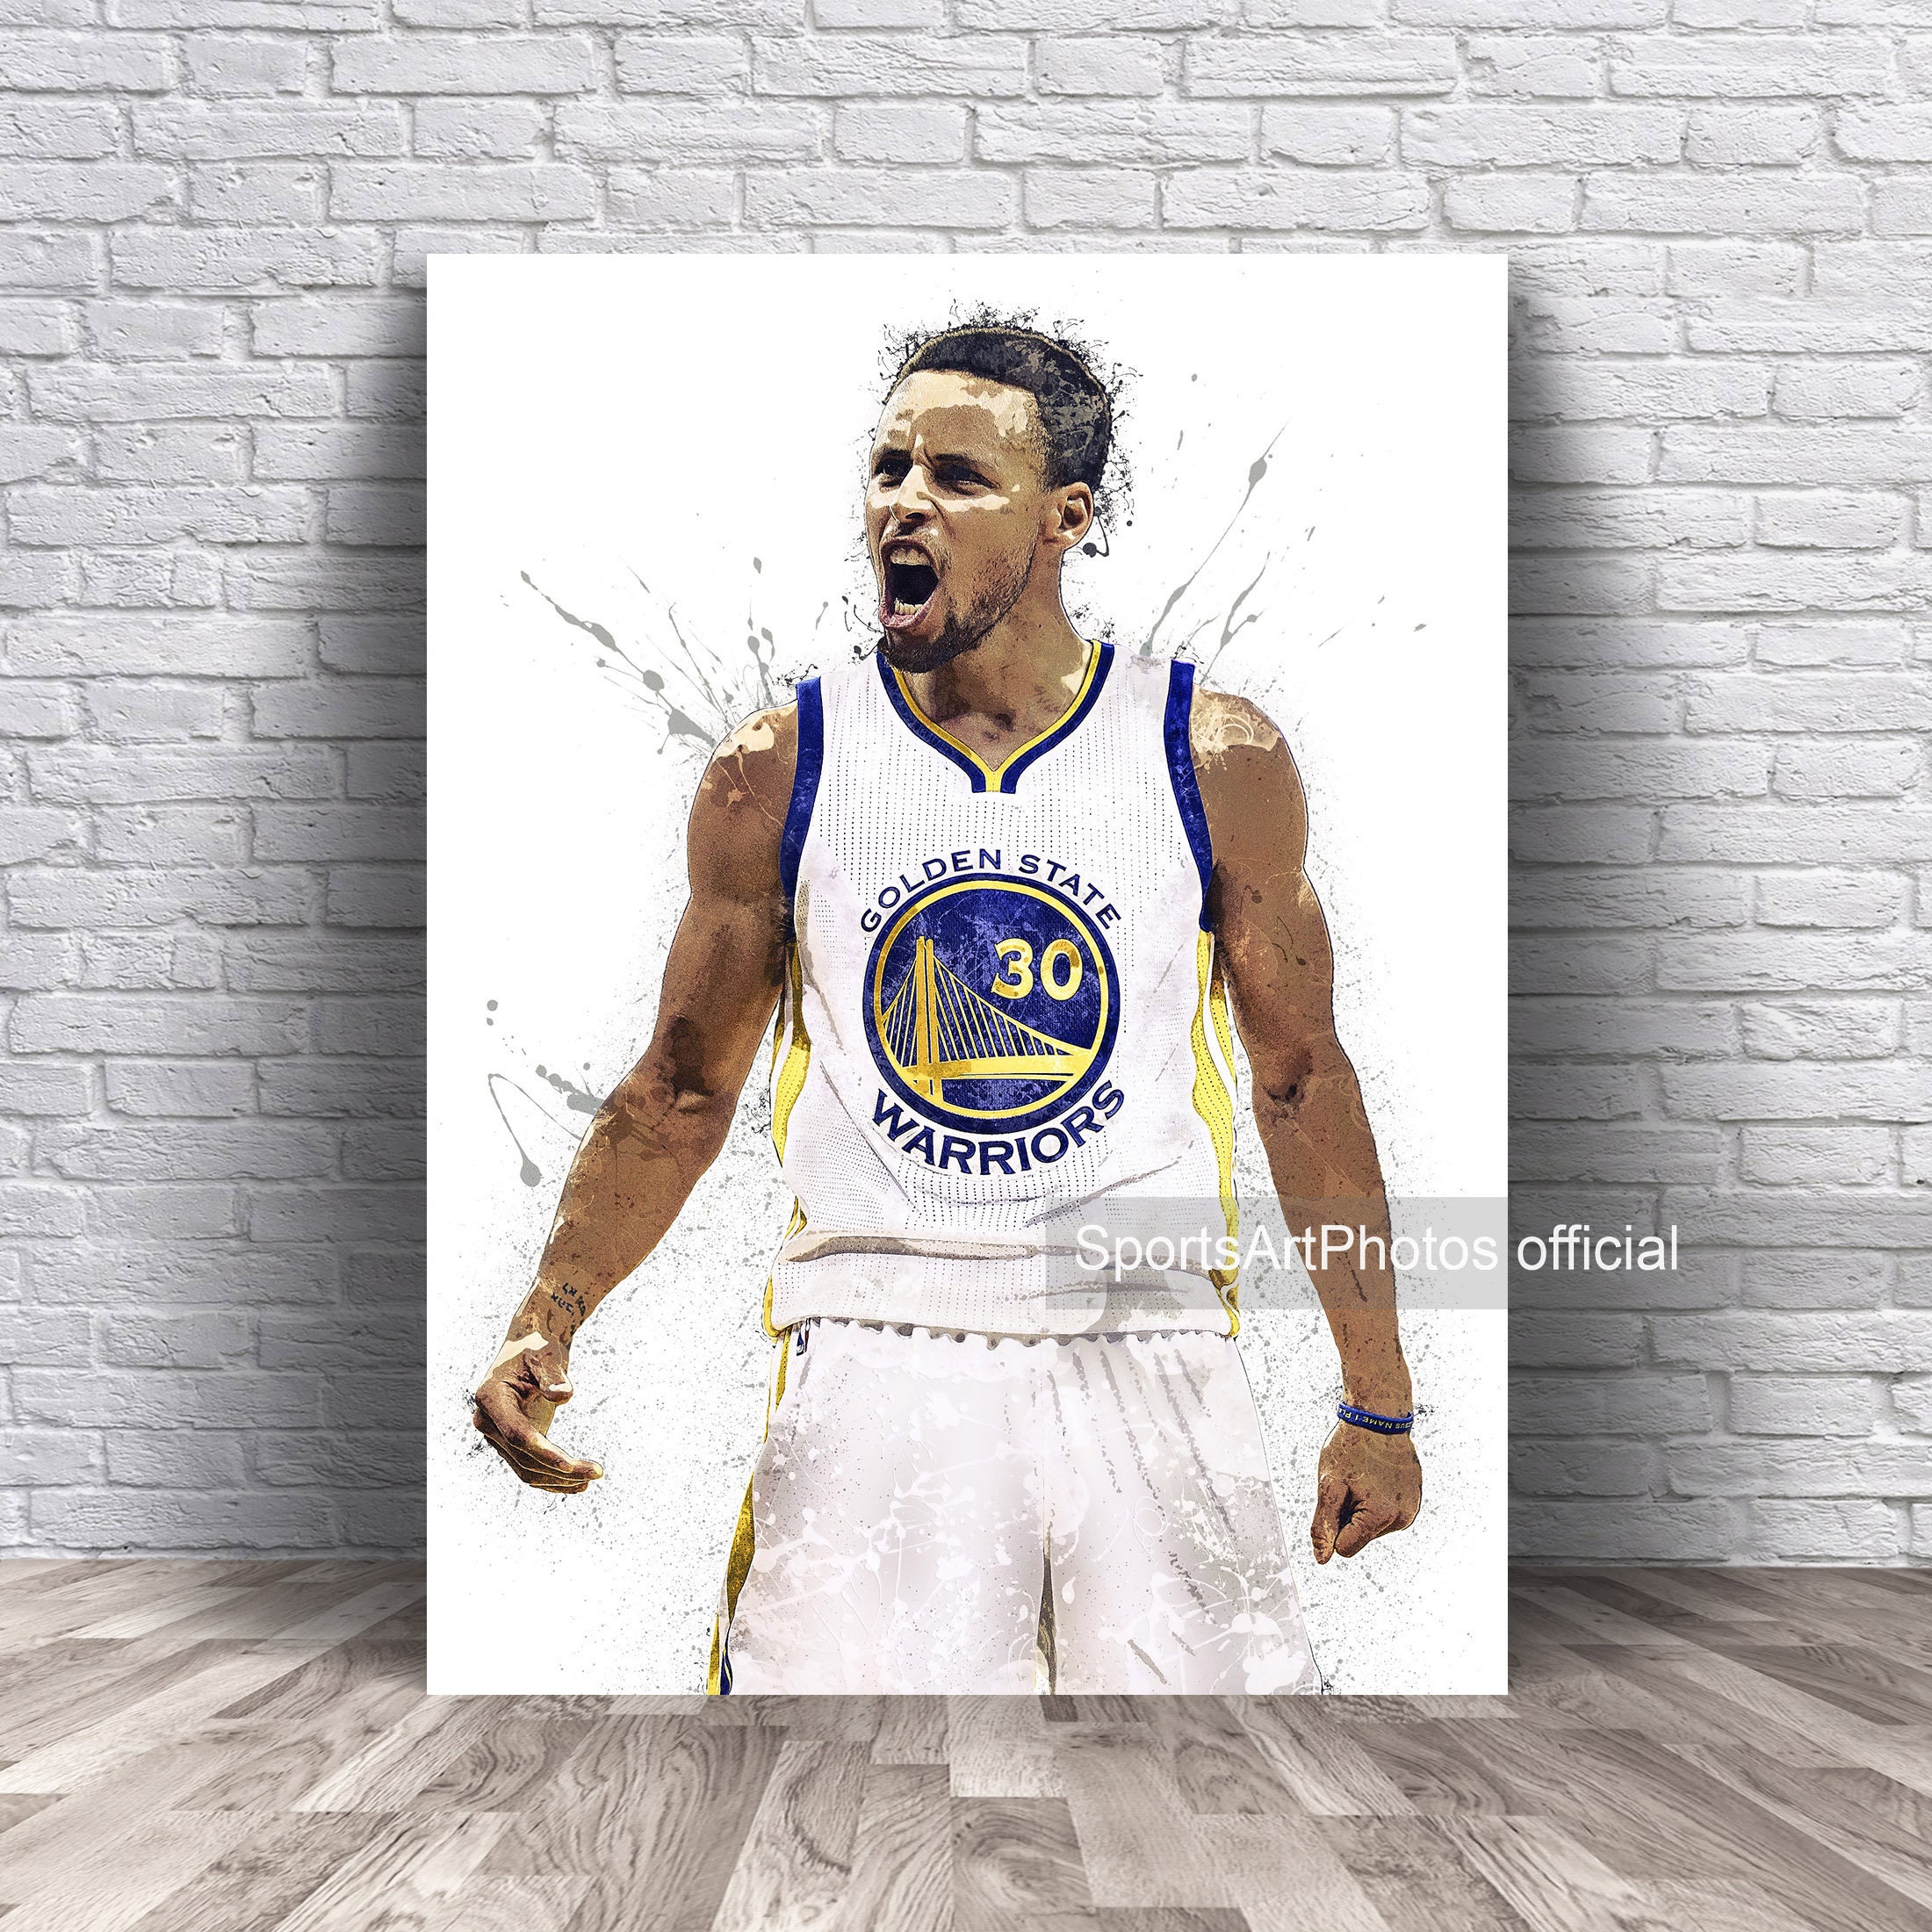  we are together Stephen Curry Poster Wall Scroll Family Wall  Print 36 inch x 24 inch: Posters & Prints